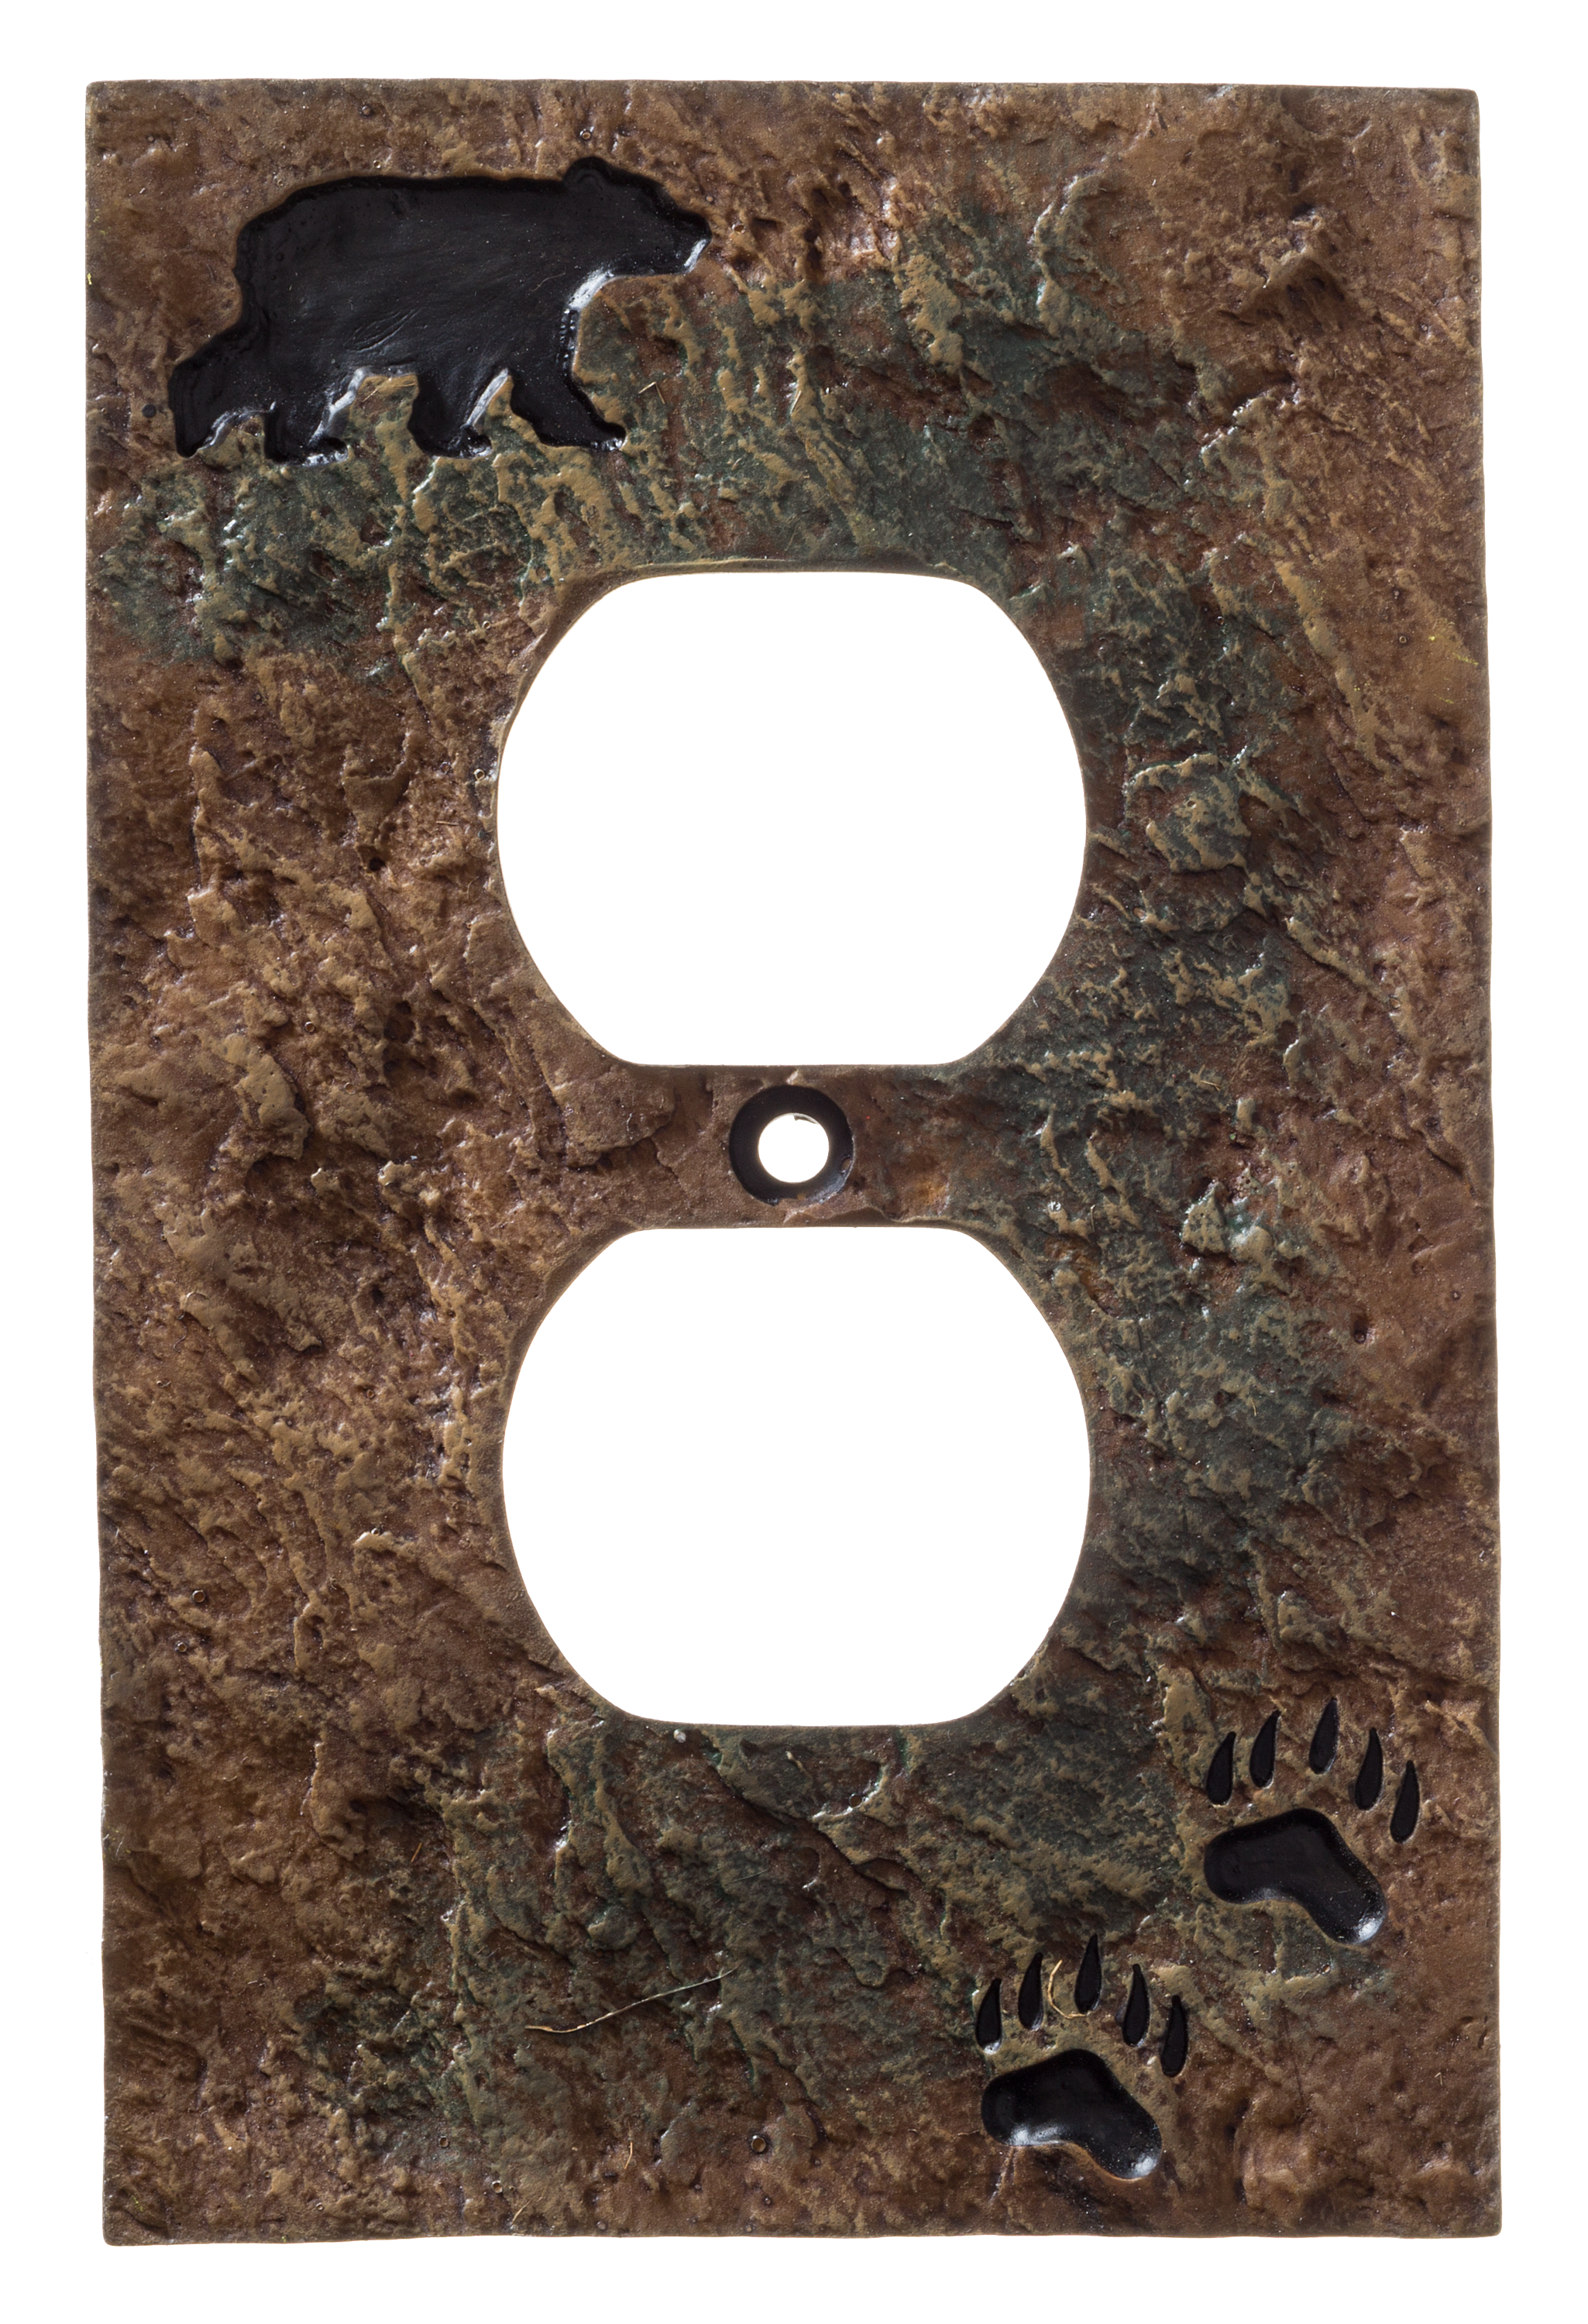 Big Sky Carvers Bear and Tracks Electrical Outlet Cover Plate